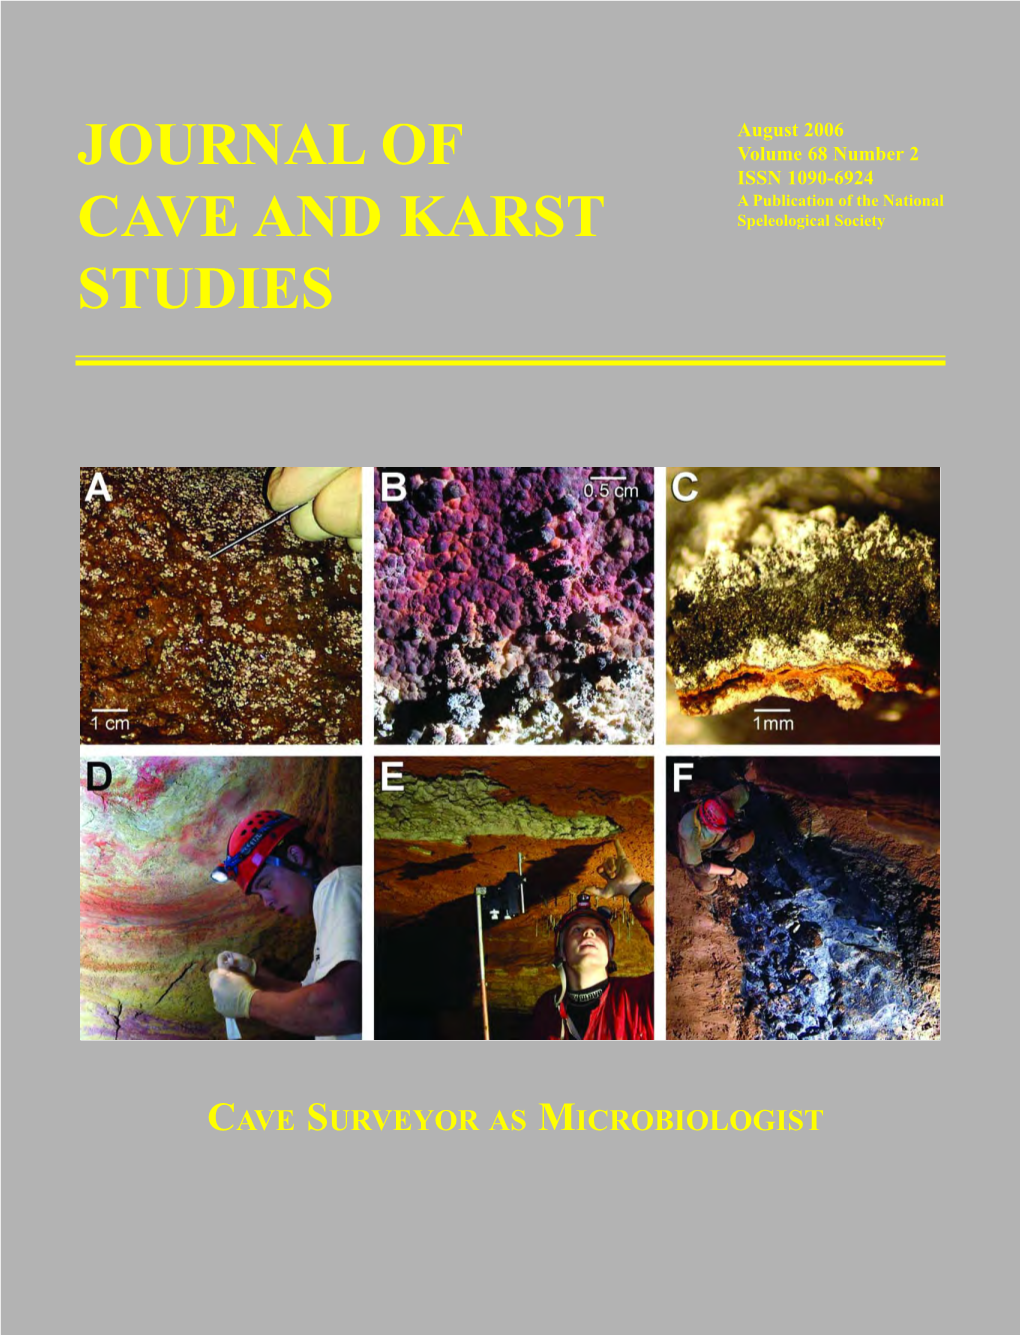 Journal of Cave and Karst Studies Editor Malcolm S